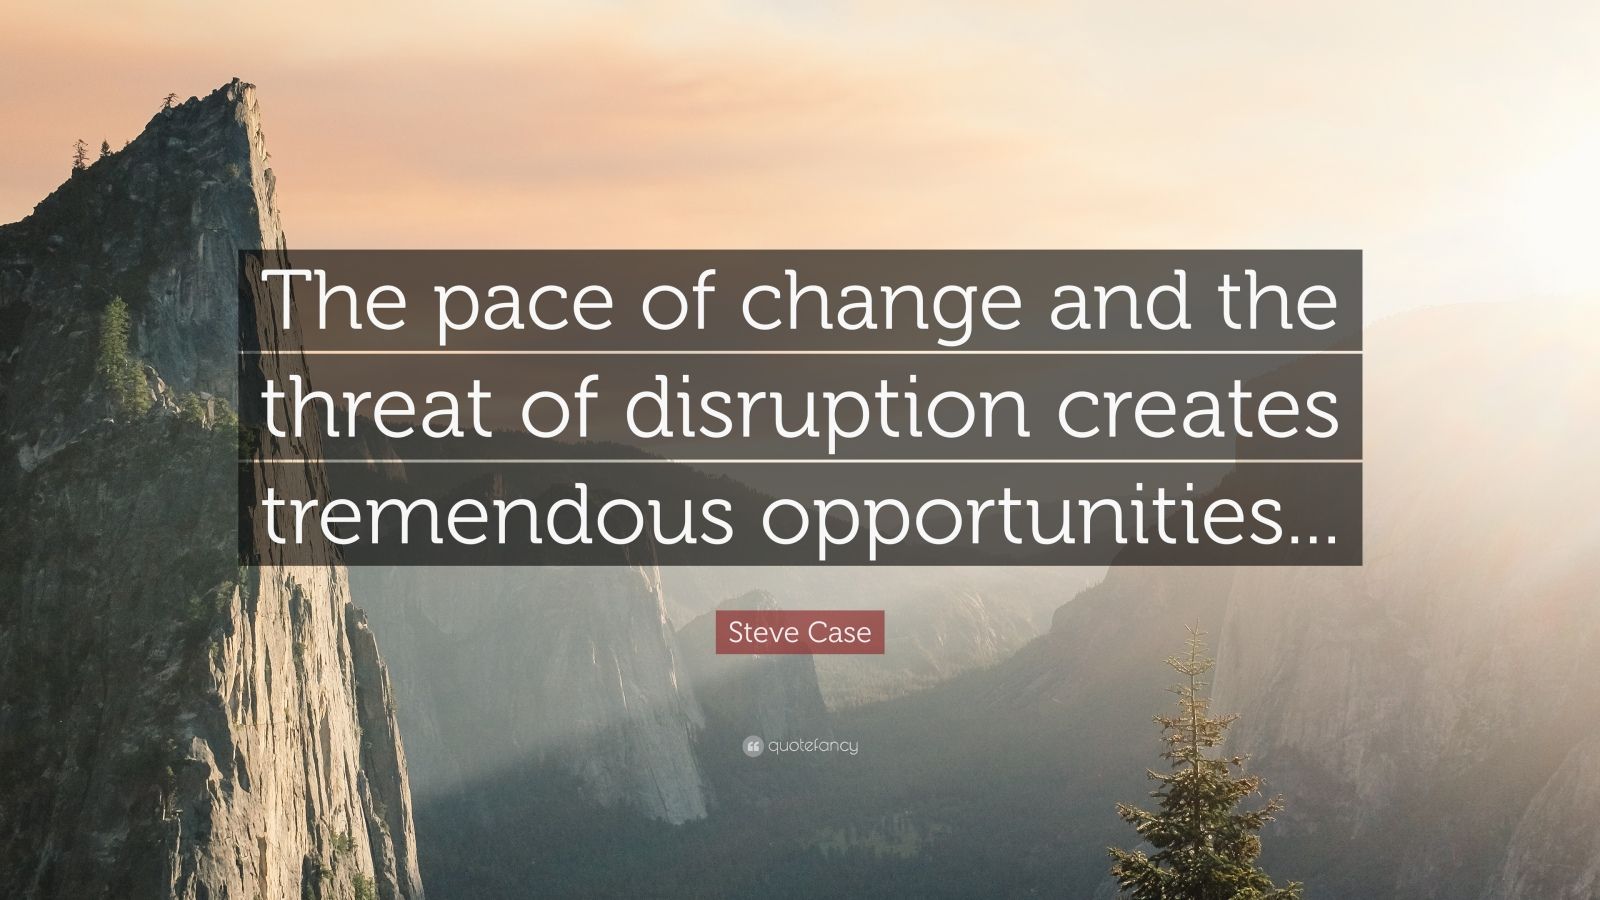 Steve Case Quote: “The pace of change and the threat of disruption